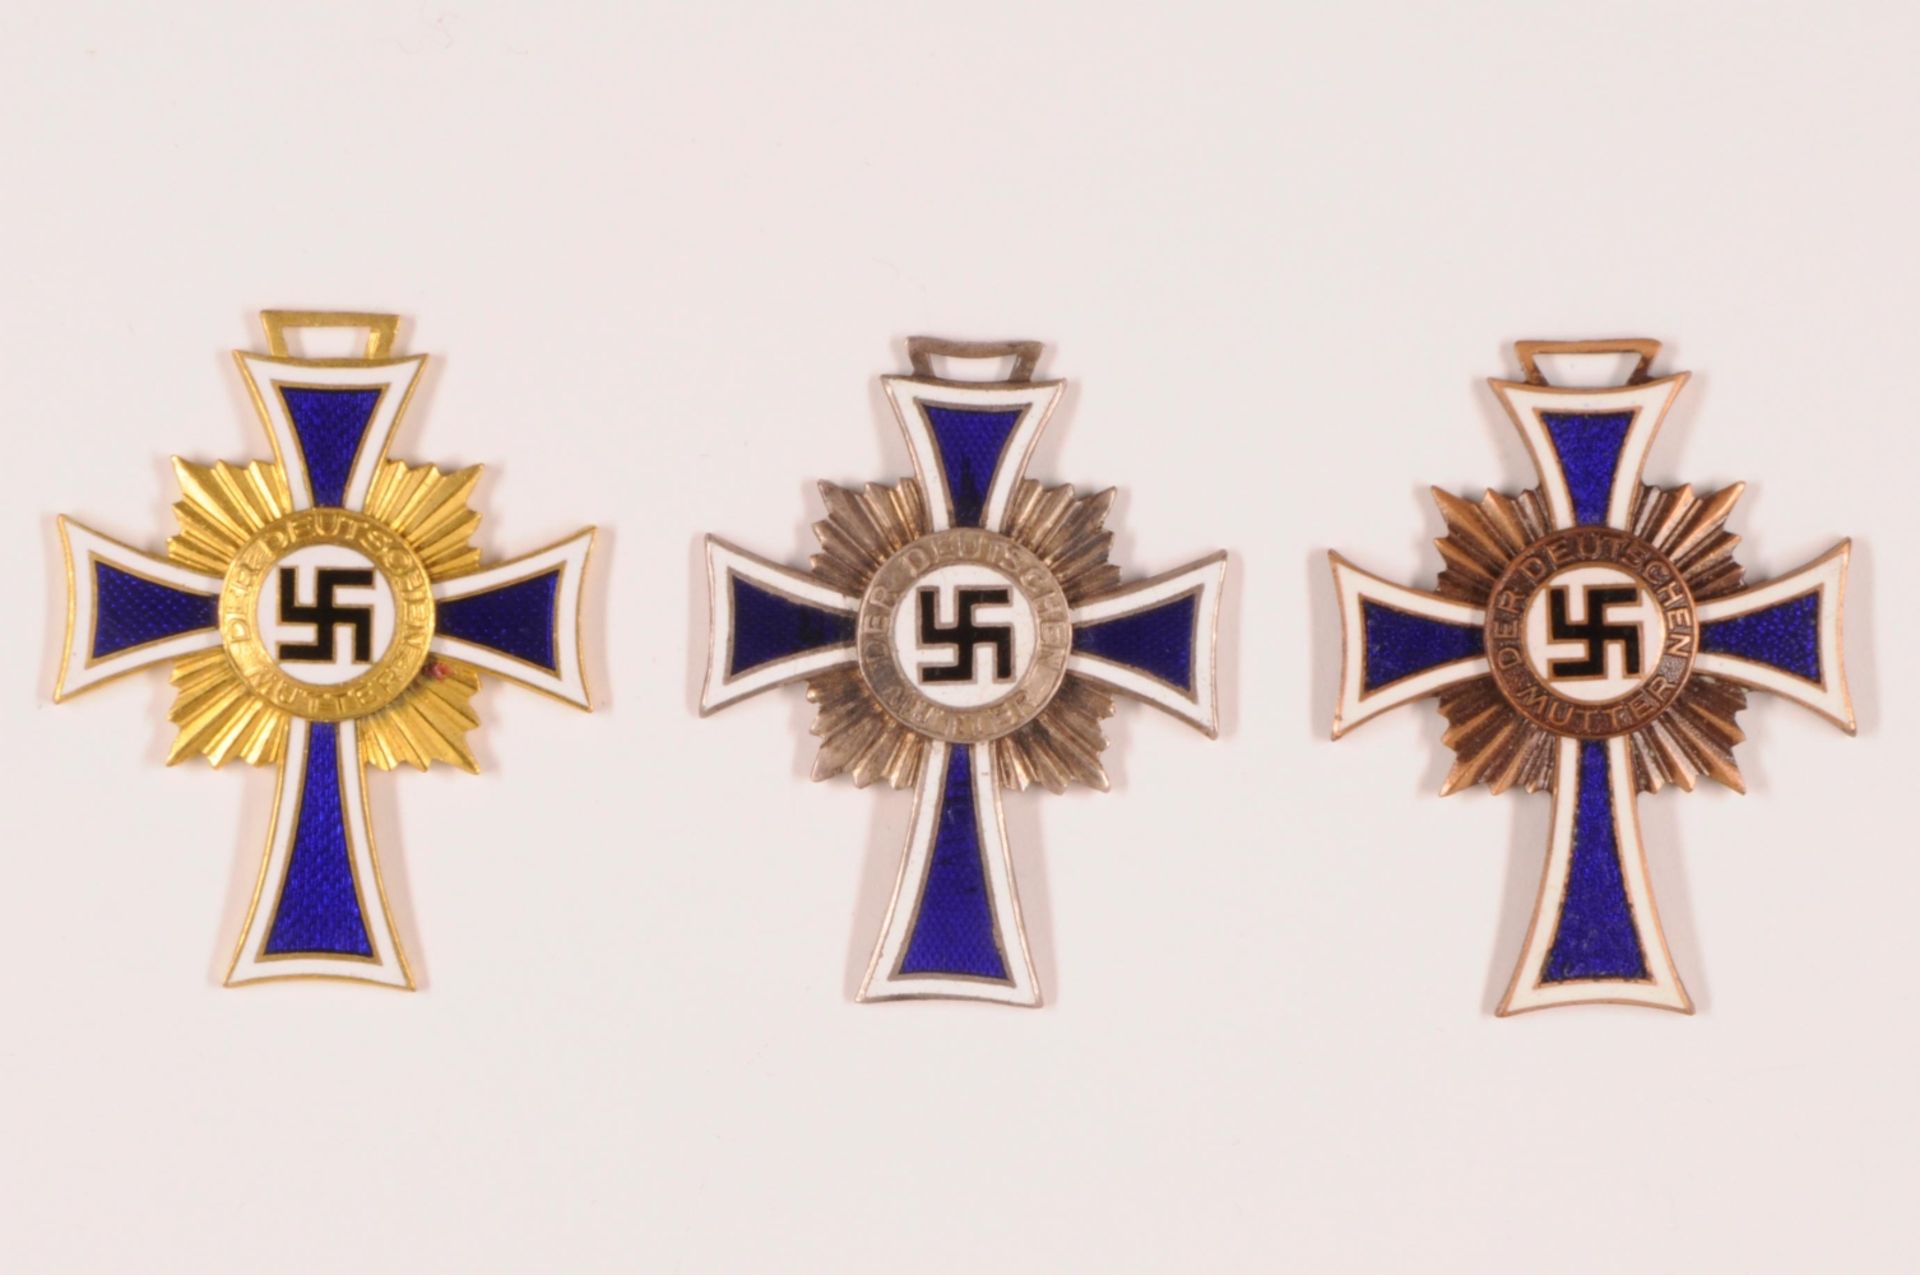 3 x cross of honor of the German mother, 1. Step, 2. Form, 16. December 1938, in gold, in silver and